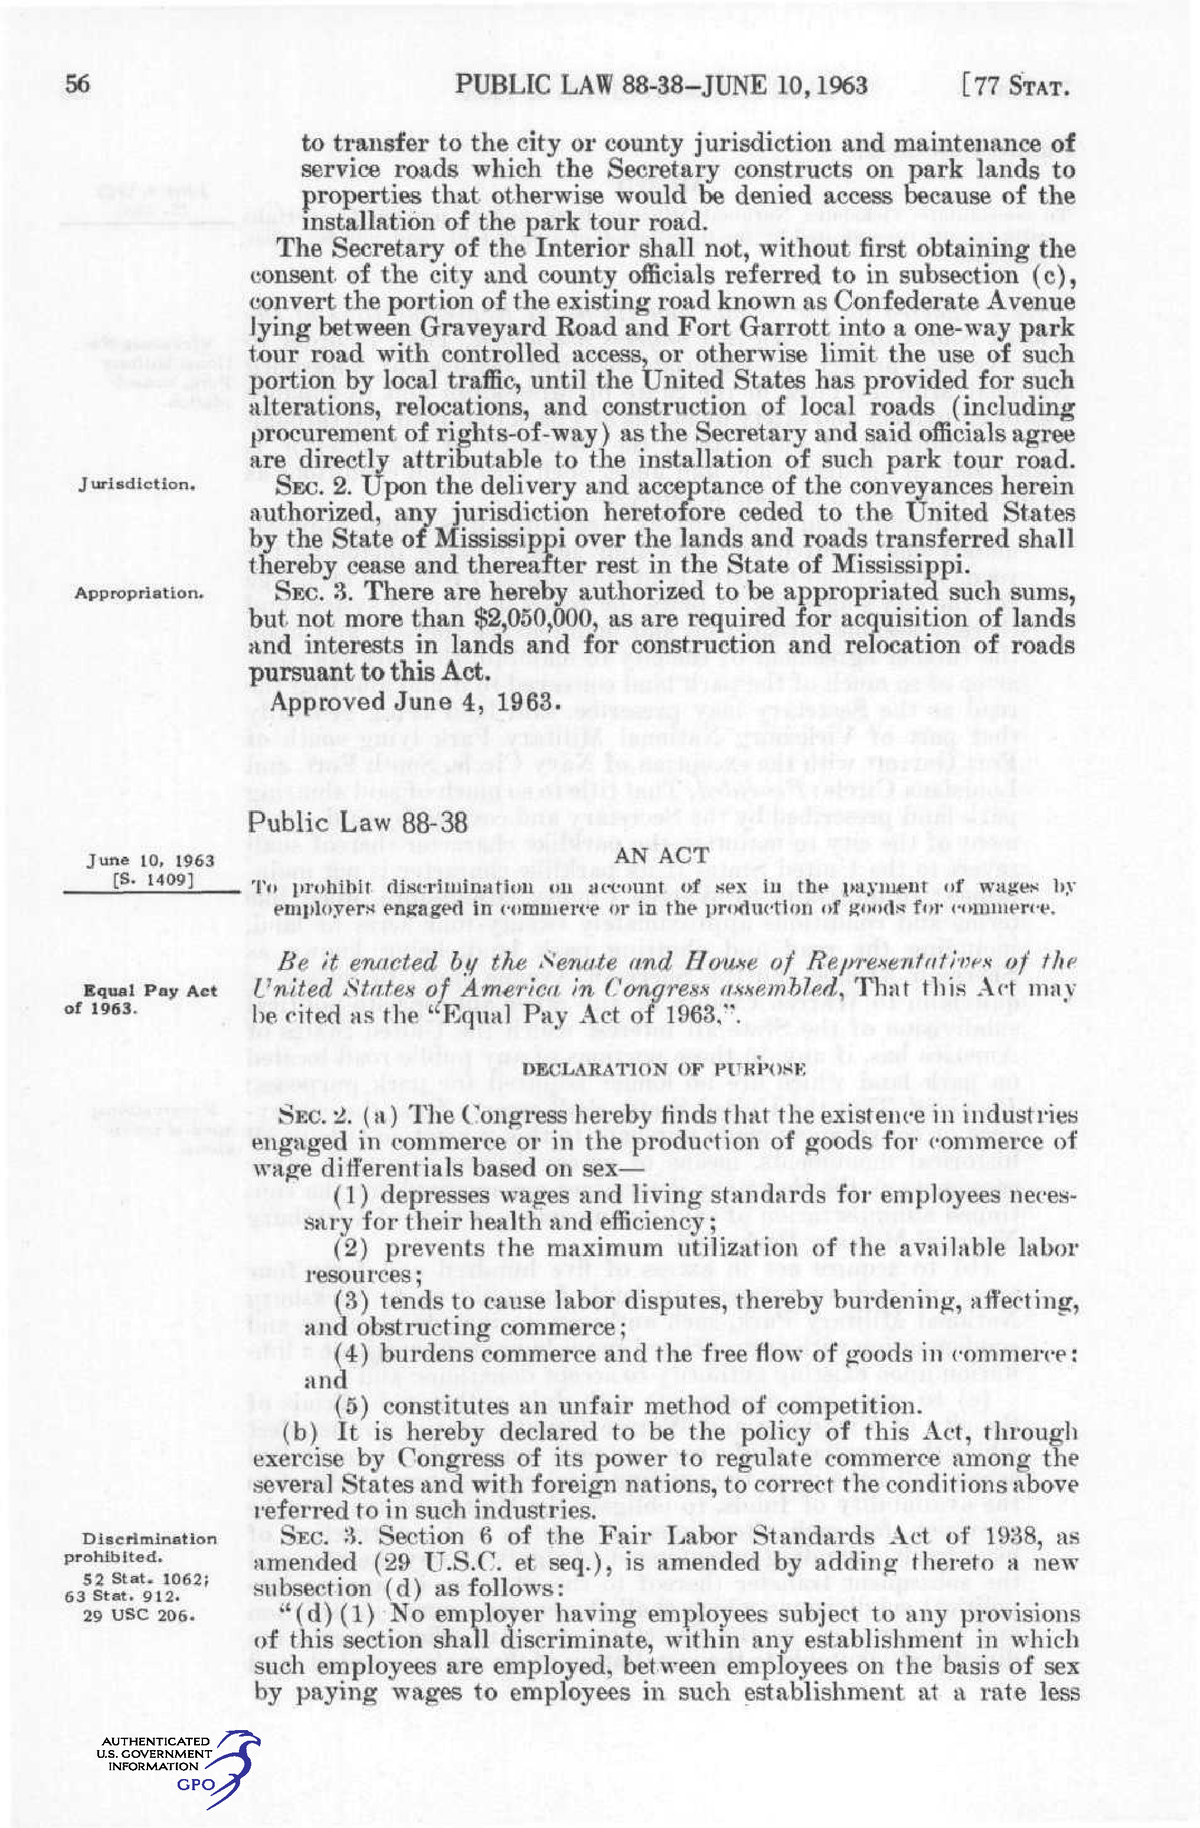 Equal Pay Act of 1963., 77 Stat. 56 legi - 56 PUBLIC LAW 88-38-JUNE ...